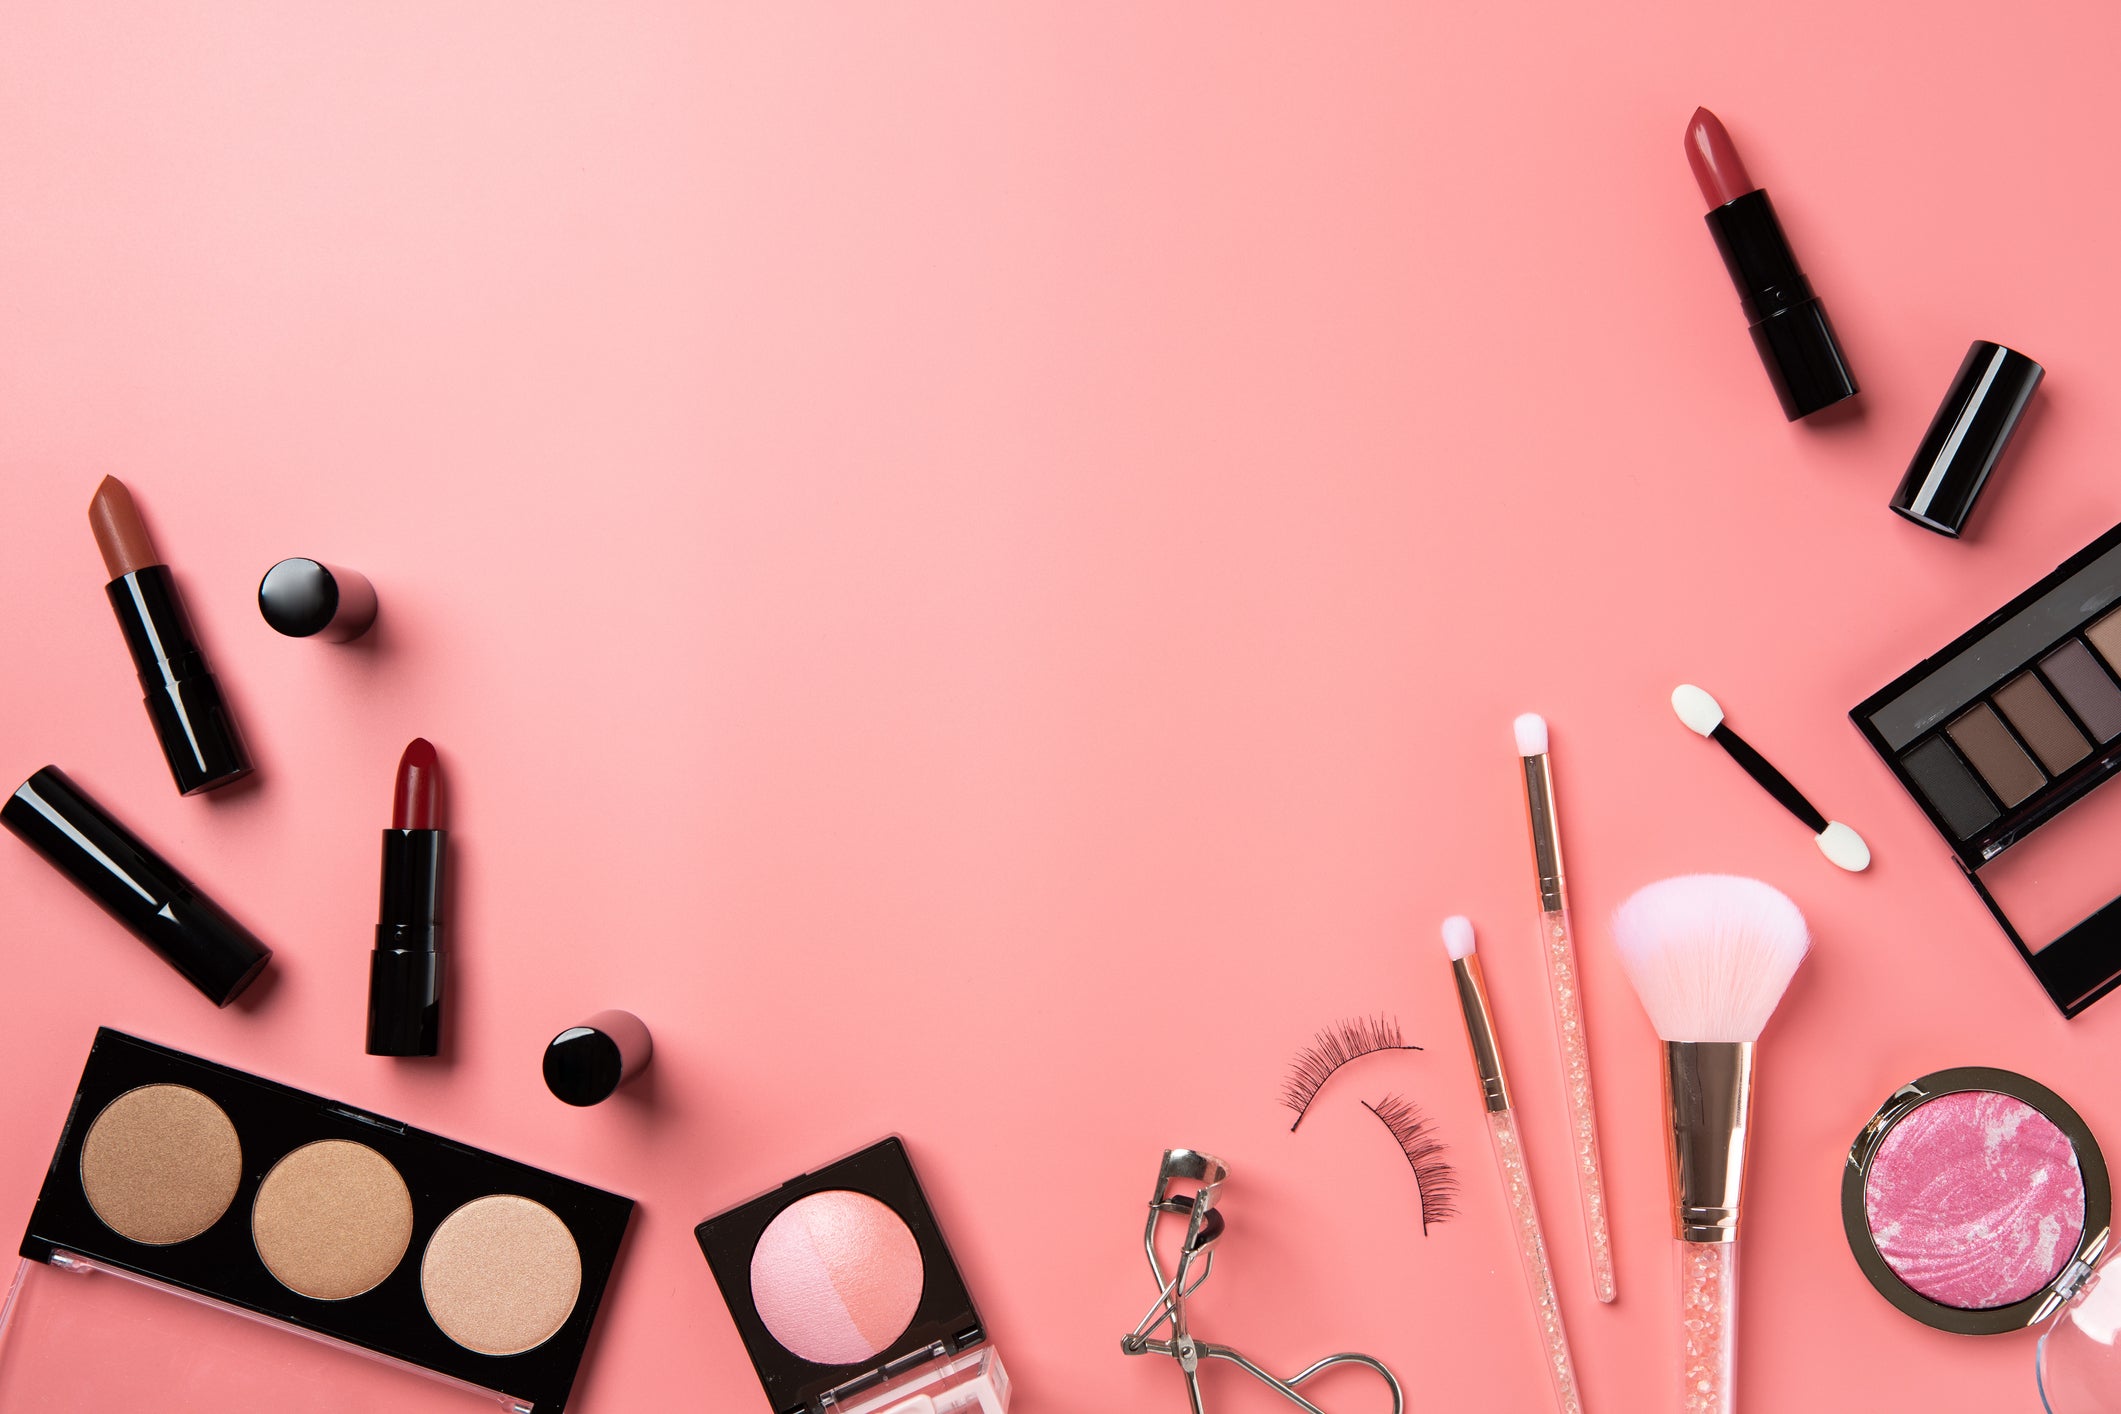 Top 10 cosmetics brands for Genz in India - 2023